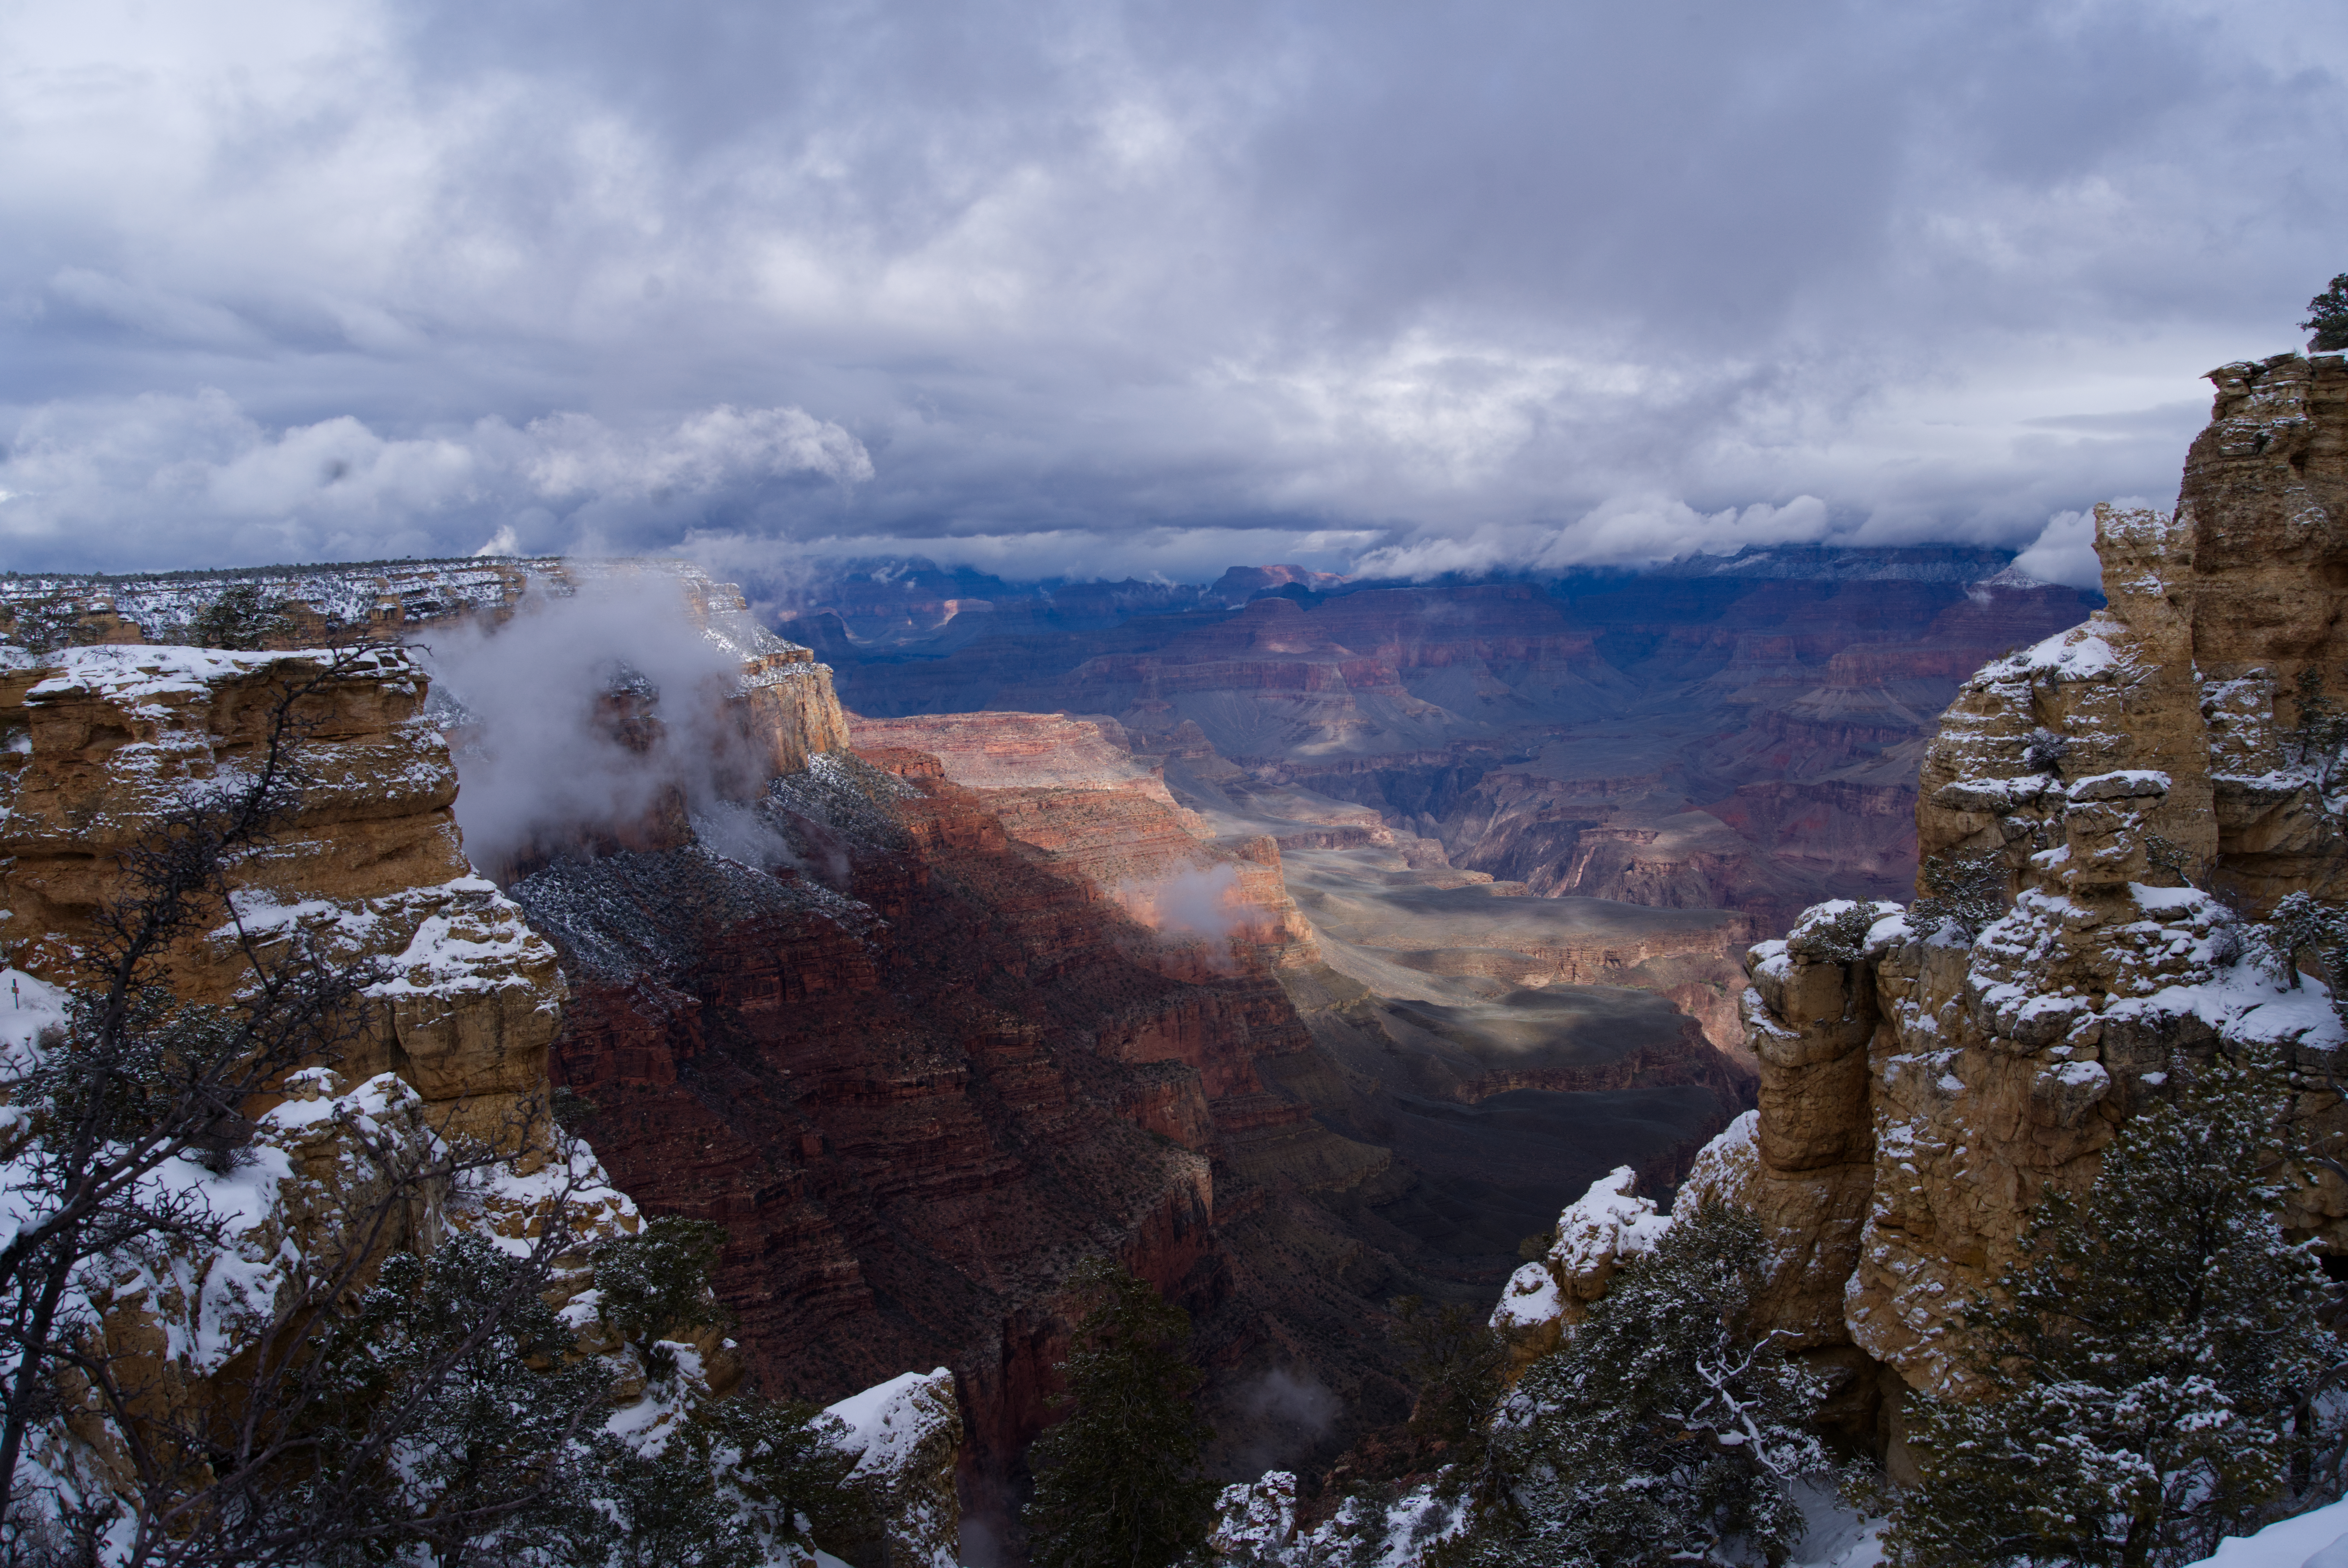 Grand Canyon in March